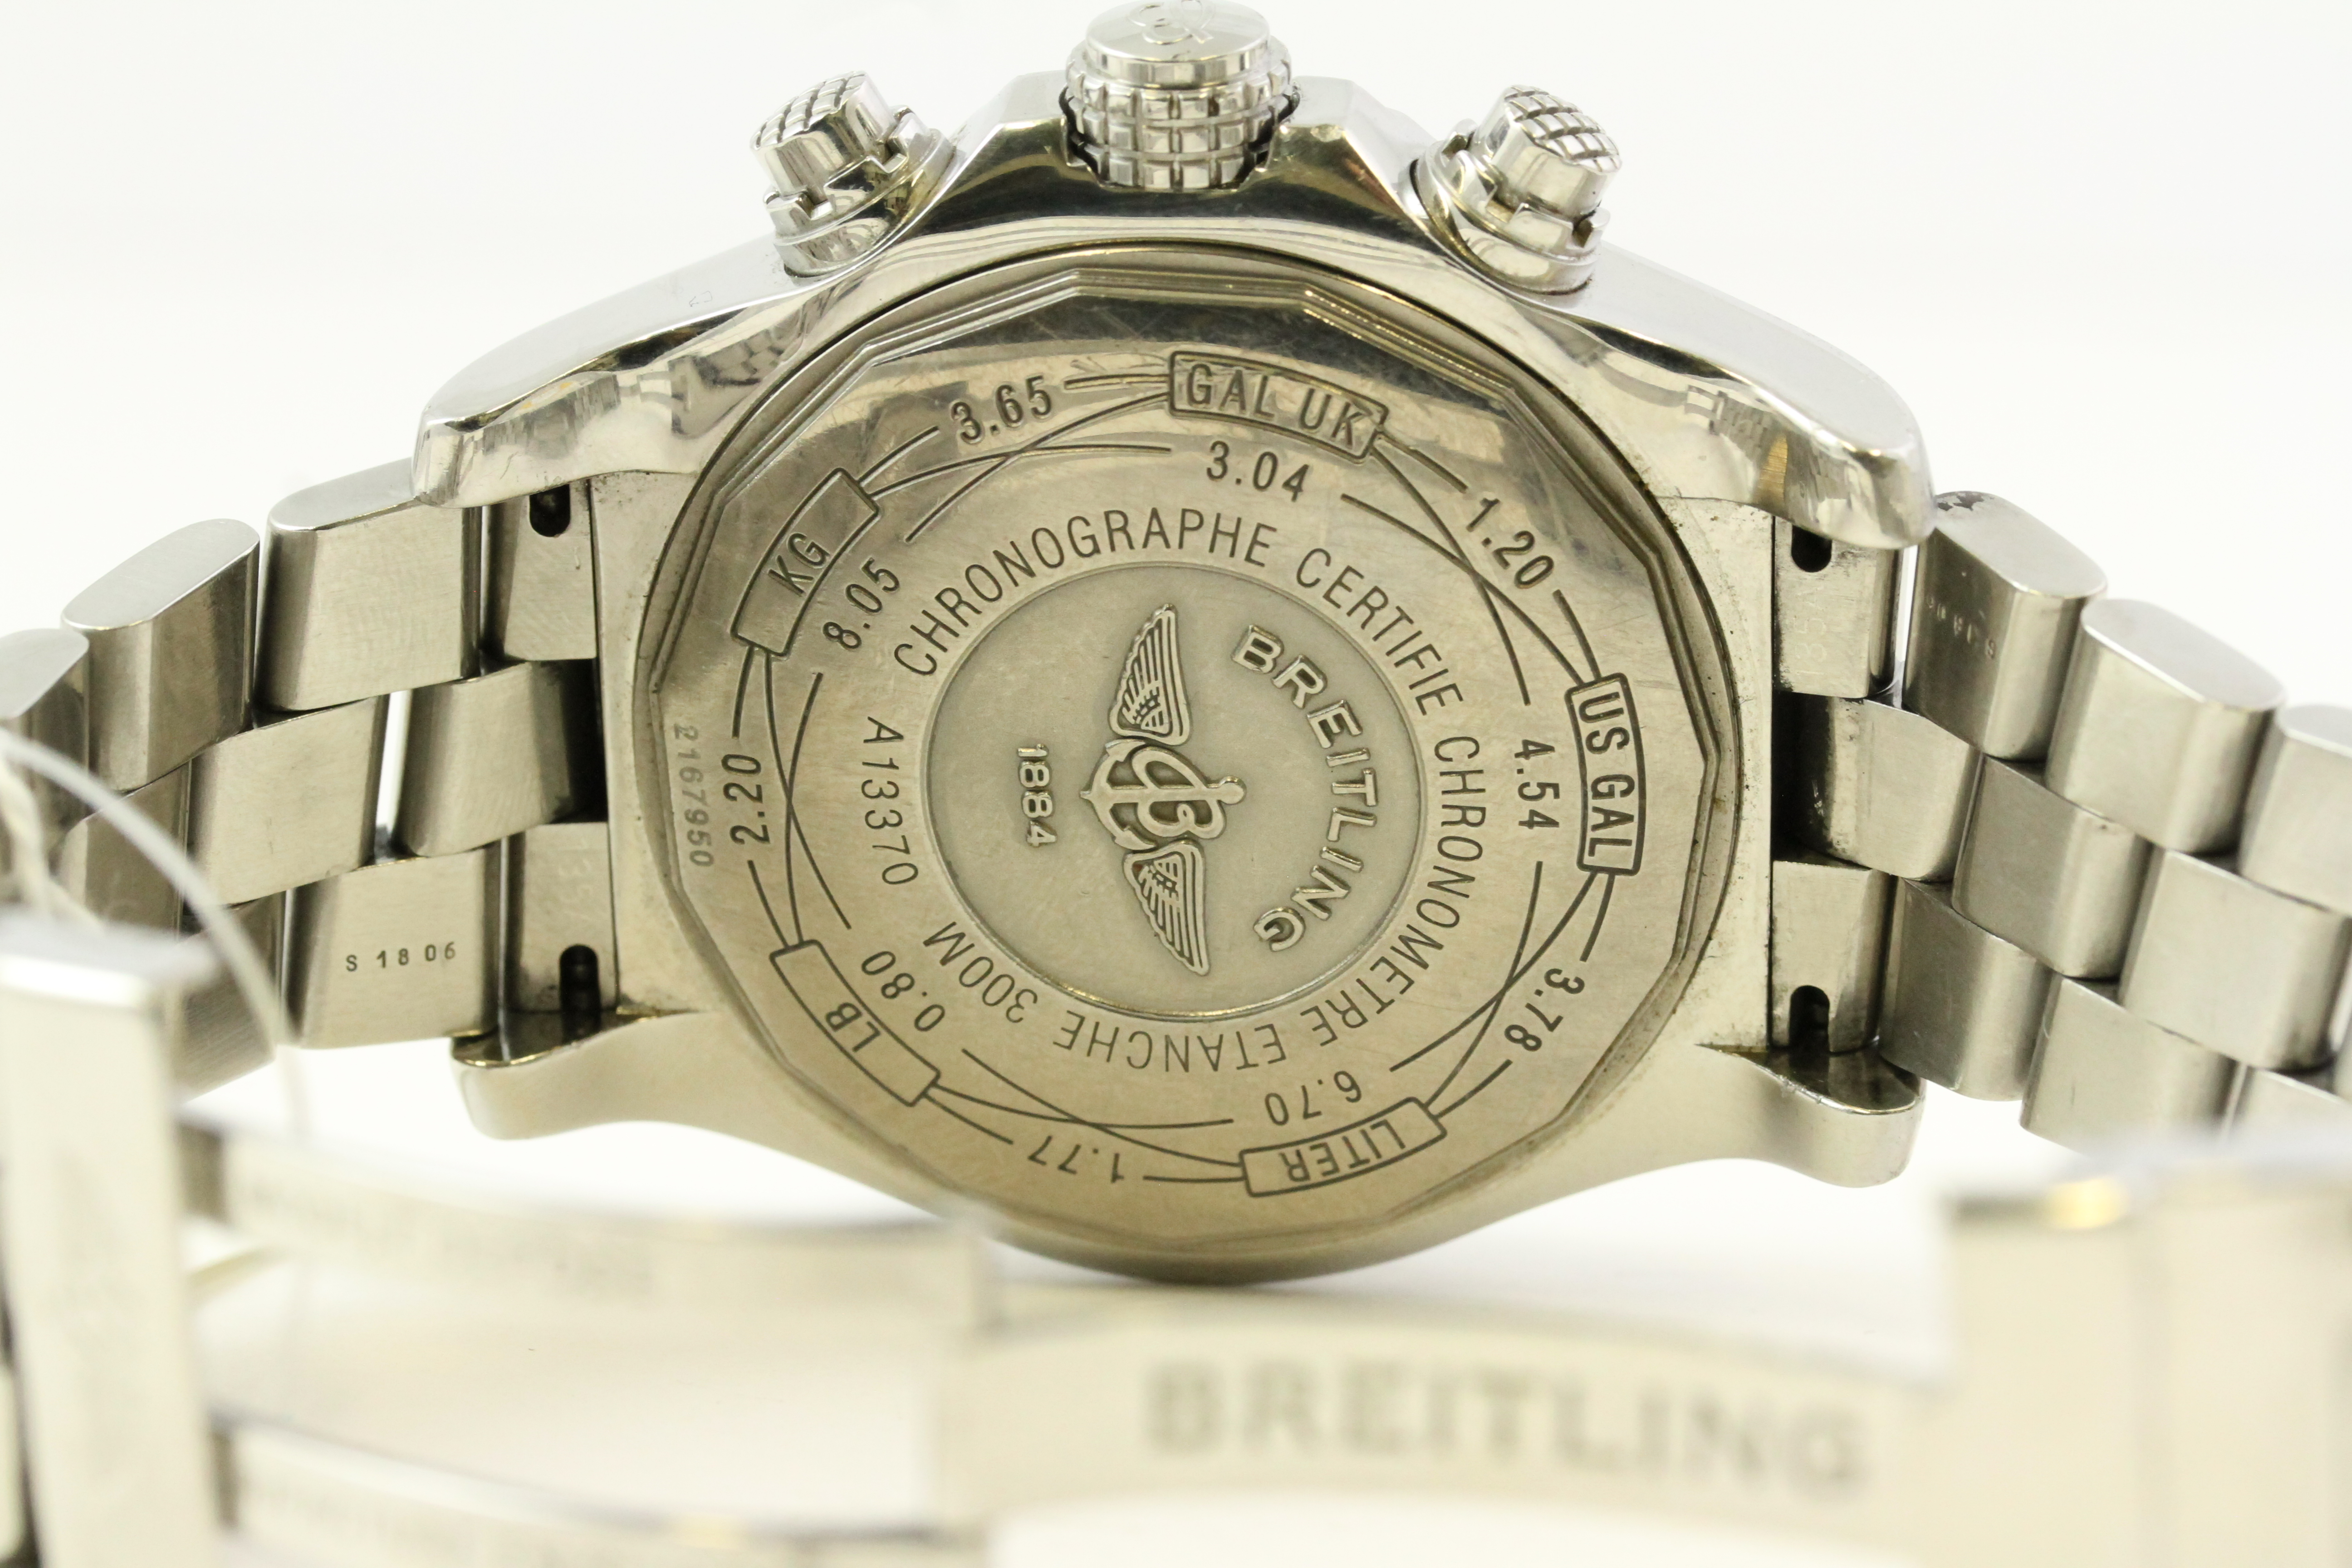 BREITLING DIAMOND SET AUTOMATIC REFERENCE A13370, black dial, Arabic numerals, Diamond set bezel, - Image 6 of 6